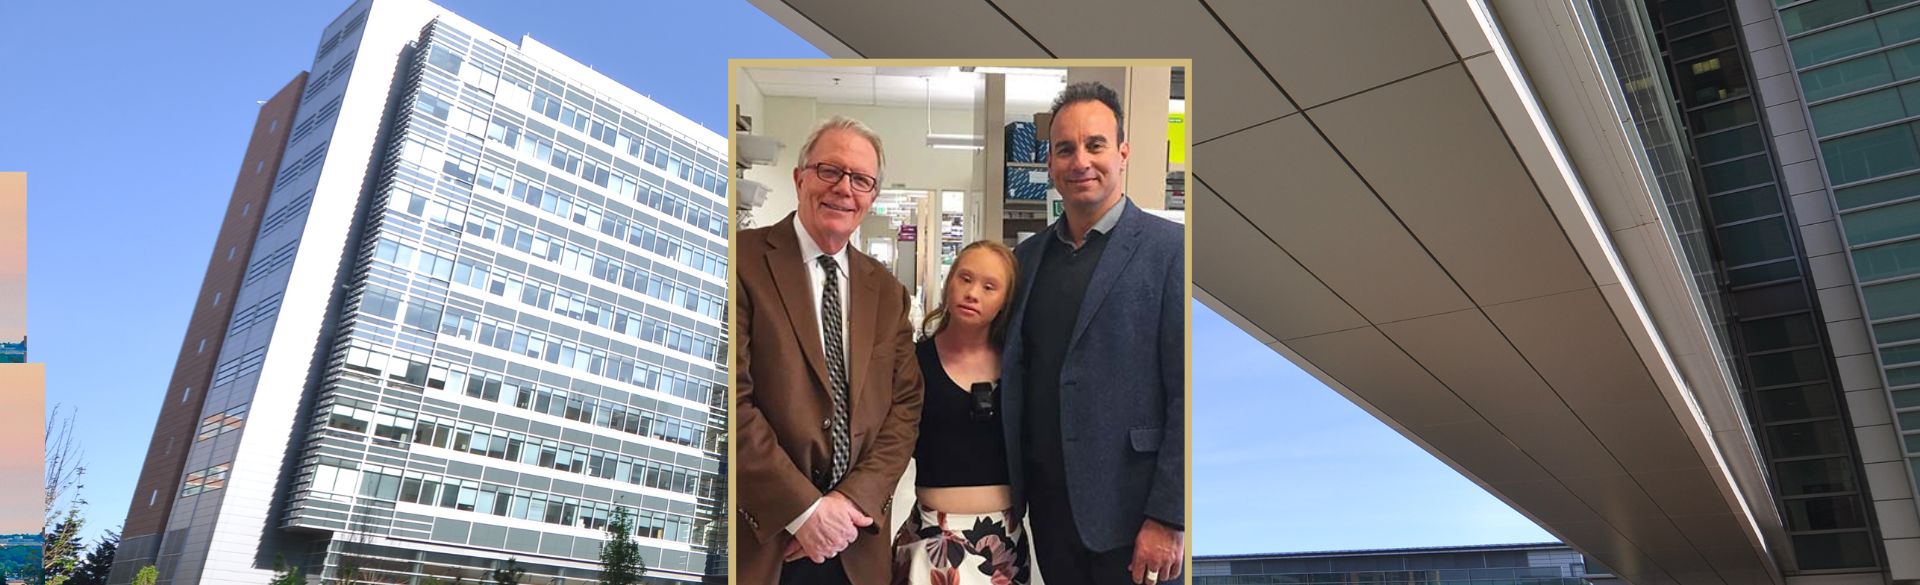 A young girl with Down syndrome stands between Dr. Potter and Dr. Espinosa 